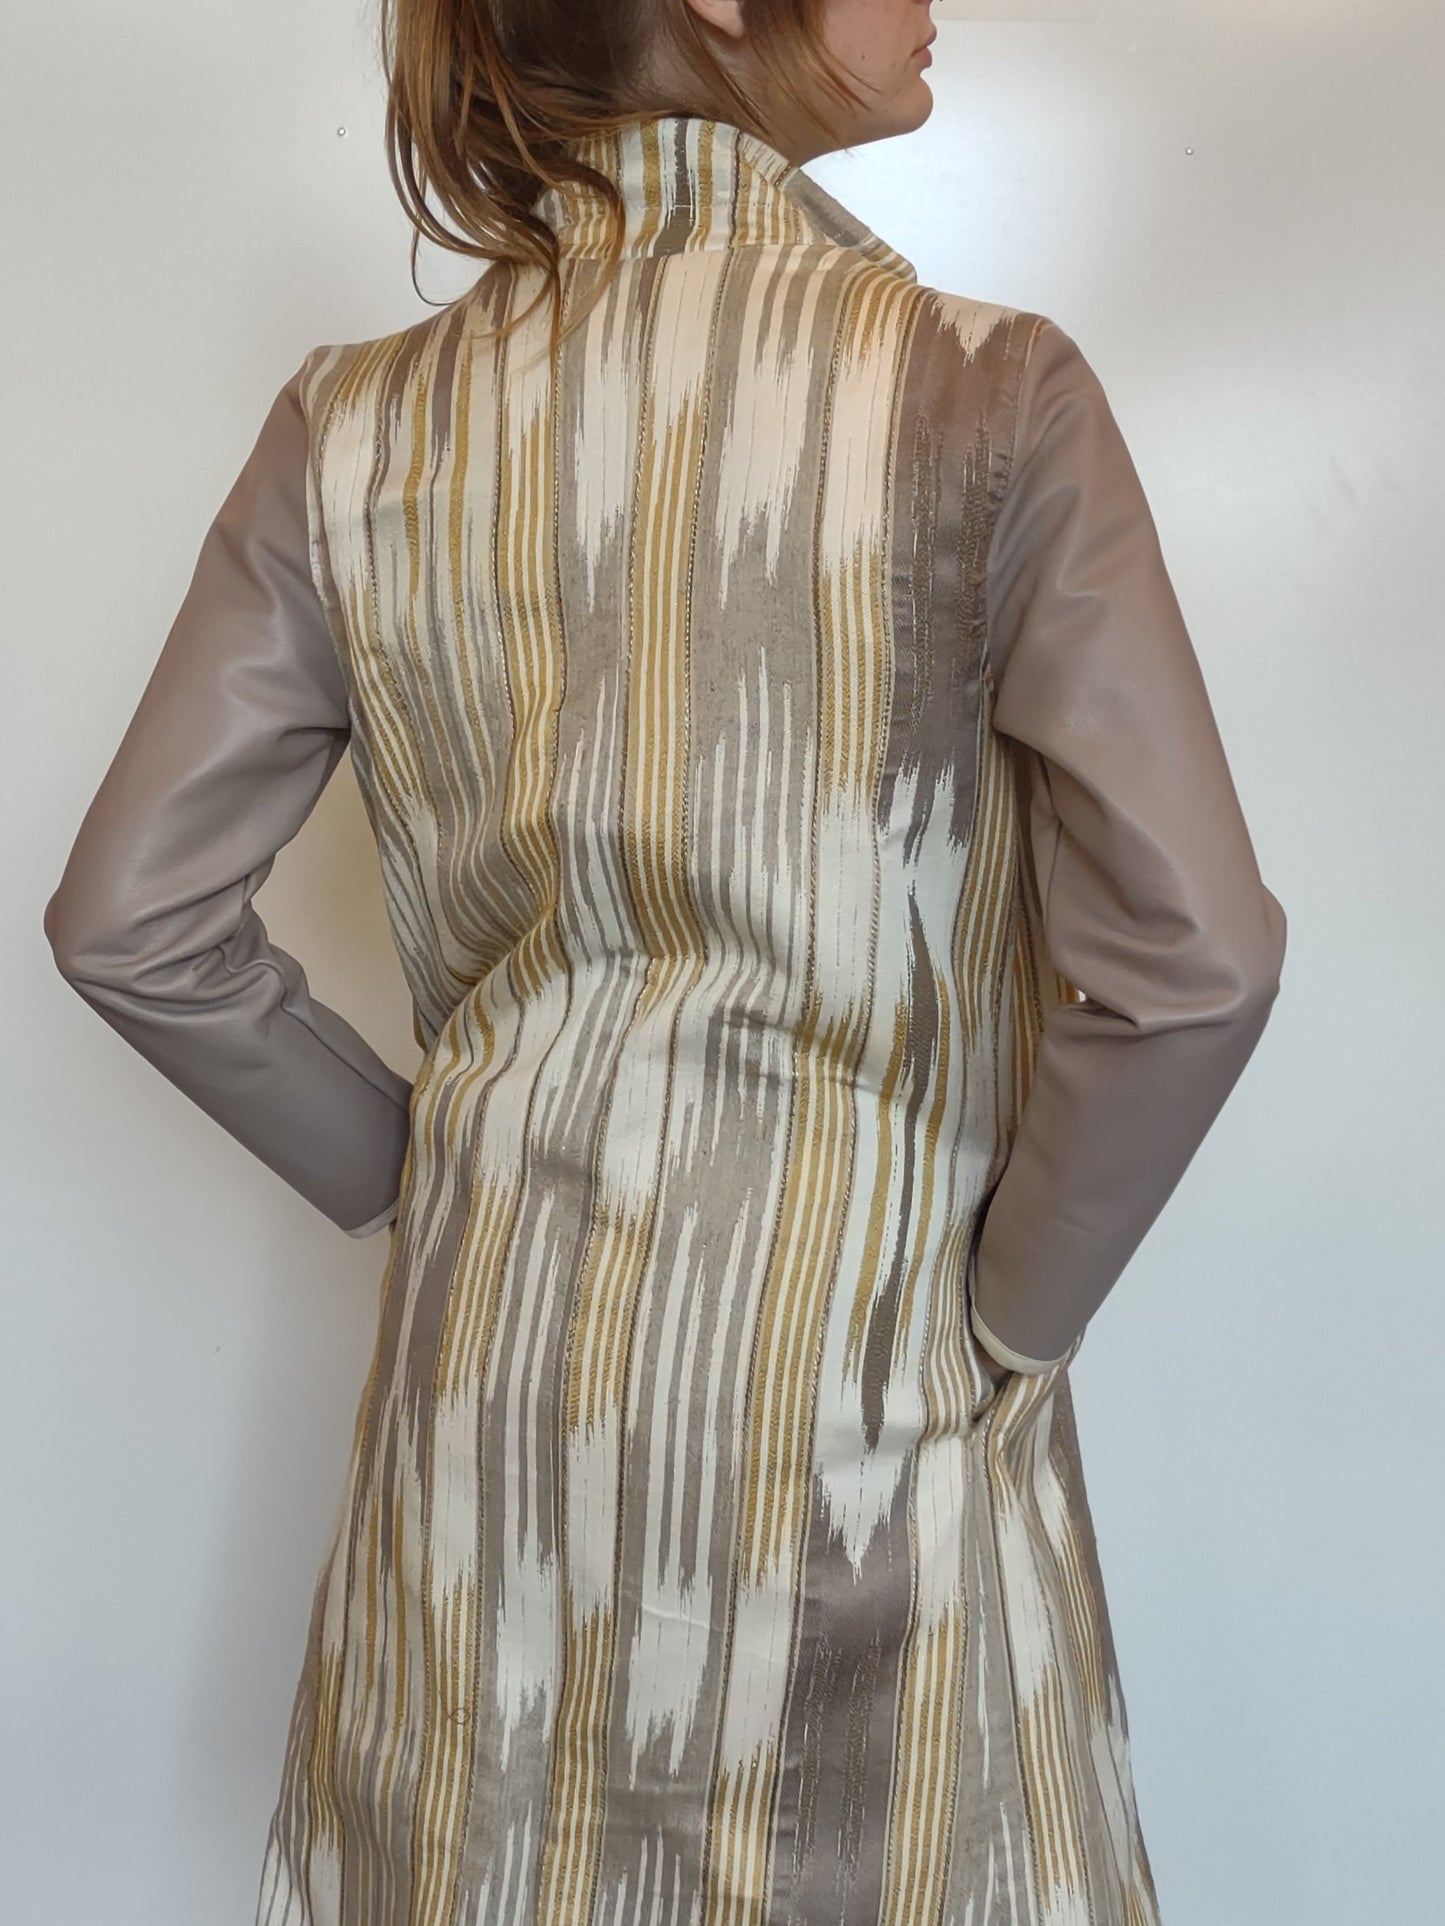 Yellow, Tan, and Cream Woven Textile Car Coat with Leather Embellishment